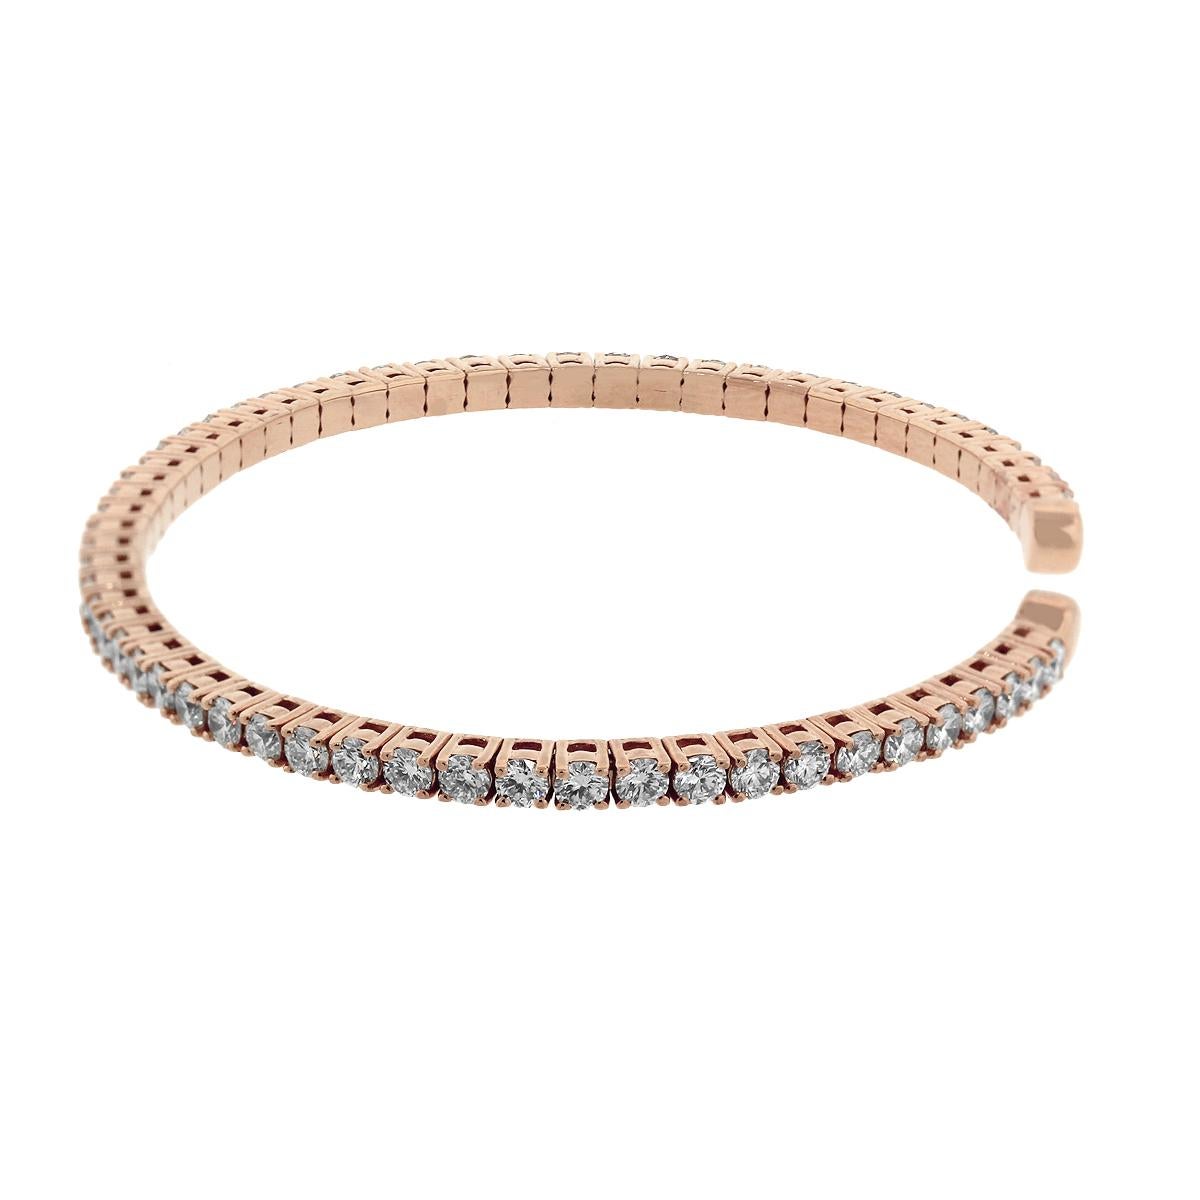 Style: Diamond Bangle
Material: 14k rose Gold
Diamond Details: Approximately 2.60ctw of round brilliant diamonds. Diamonds are G/H in color and VS in clarity.
Total Weight: 8.9g (5.7dwt)
Bracelet Measurements: Will fit a 6″ Wrist
SKU: A30311893